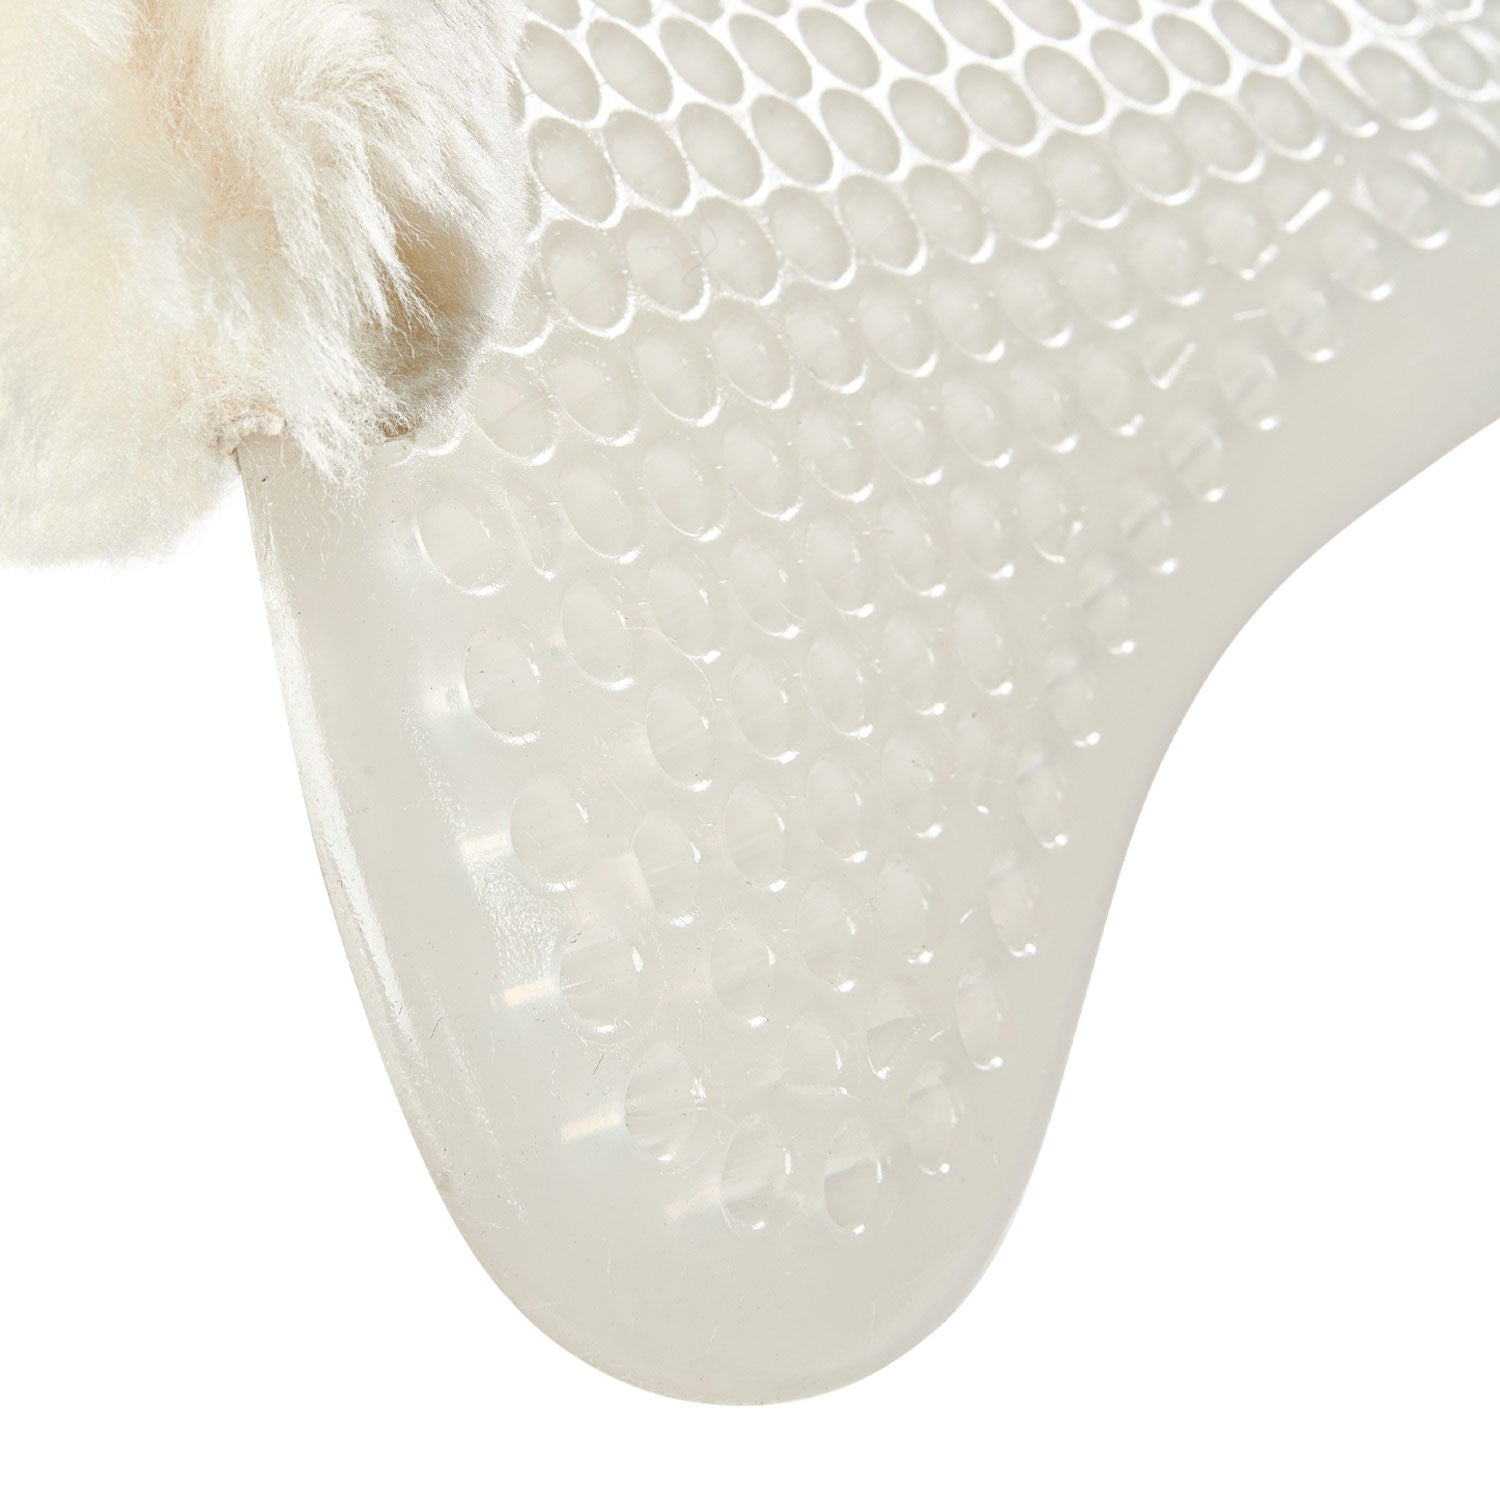 Pad Gel classic pad cut out sheepskin and front riser - Reitstiefel Kandel - Dein Reitshop